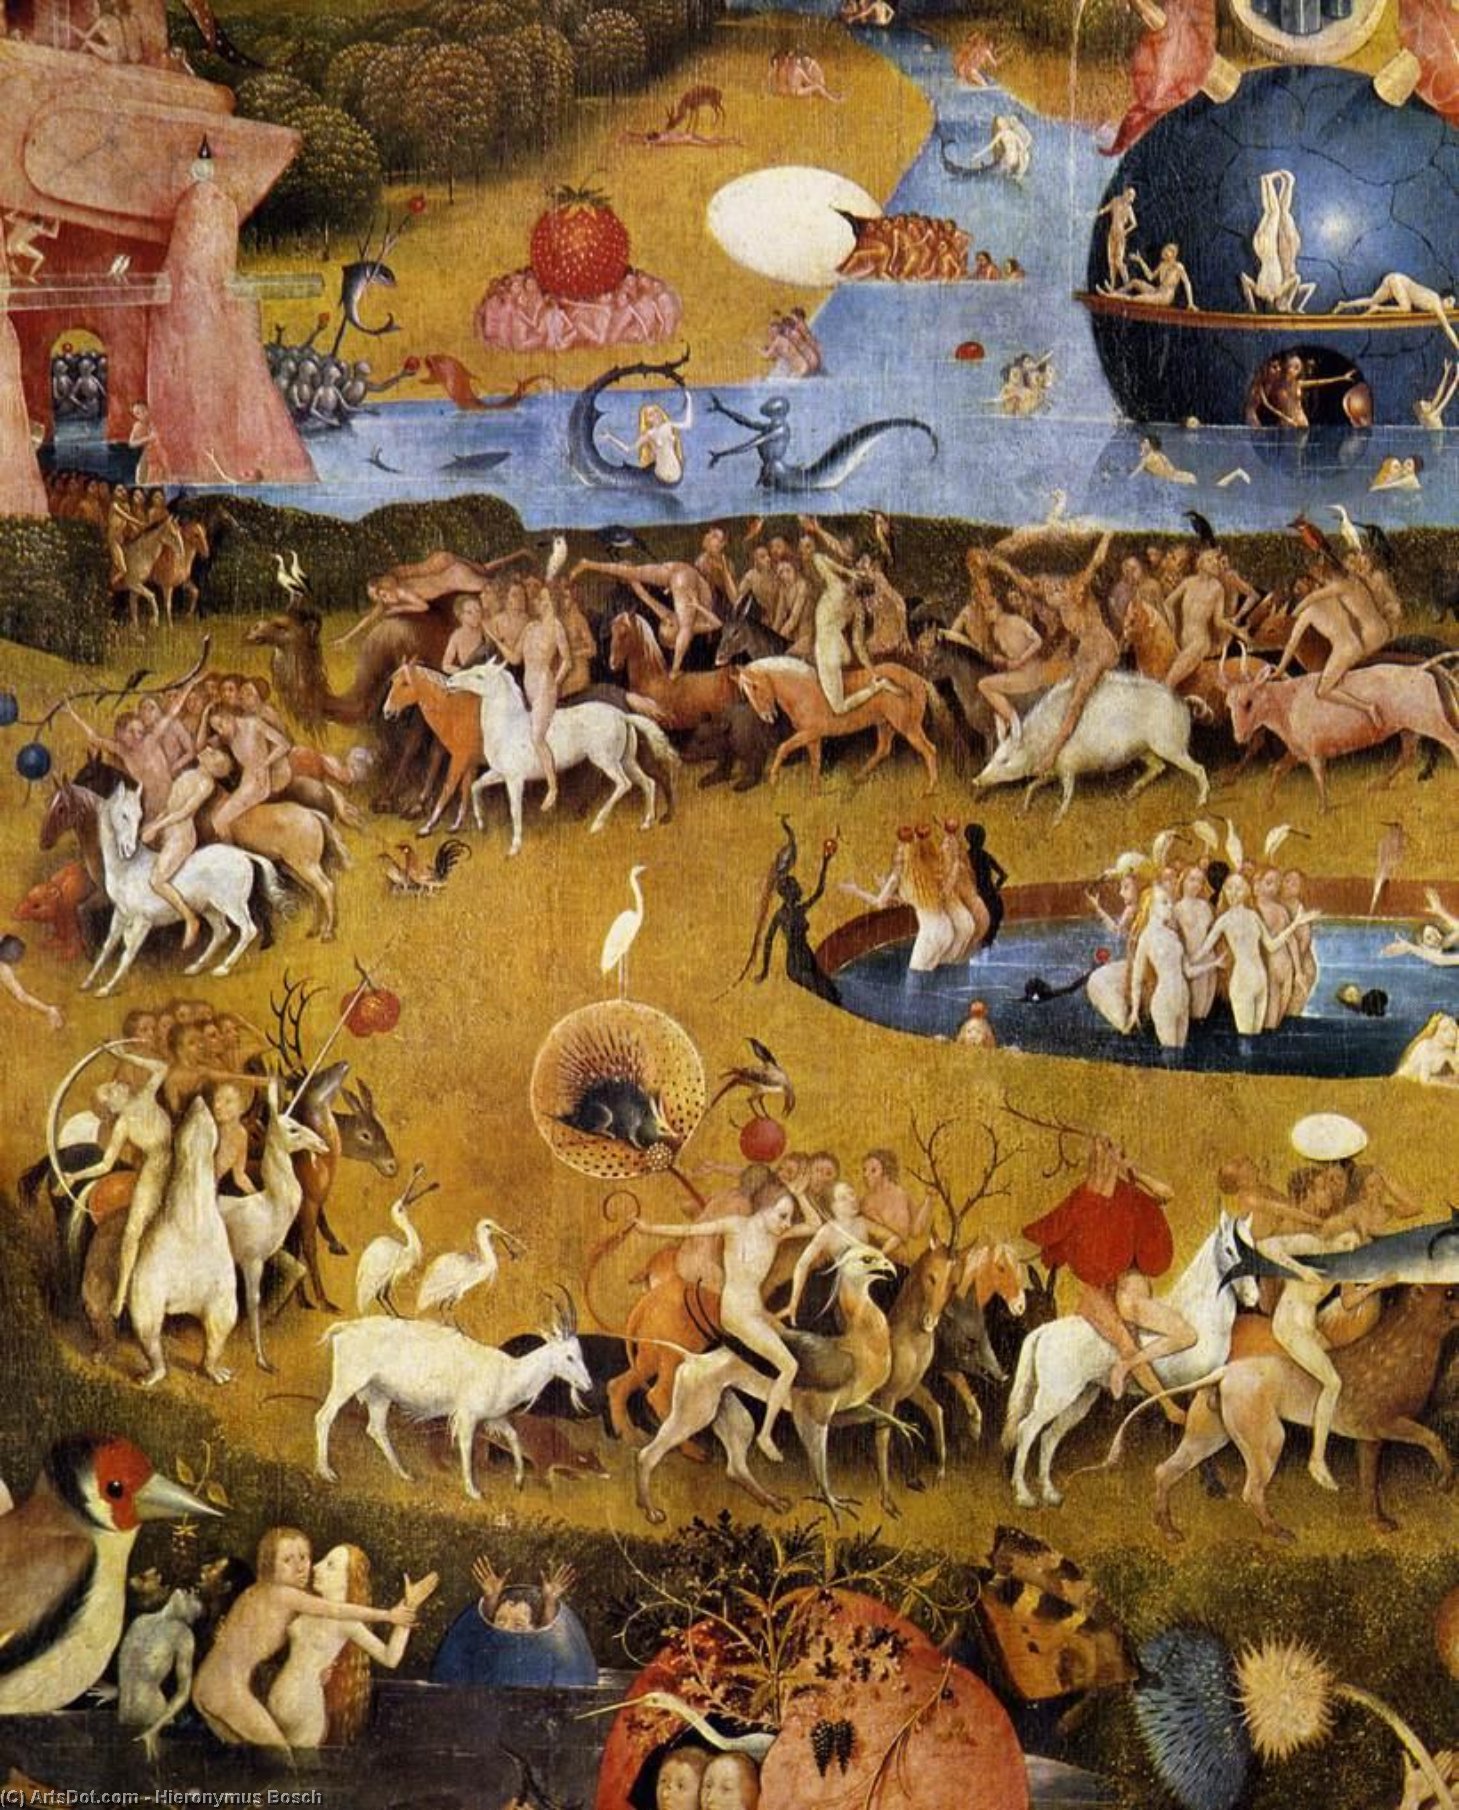 WikiOO.org - 백과 사전 - 회화, 삽화 Hieronymus Bosch - Triptych of Garden of Earthly Delights (detail) (47)